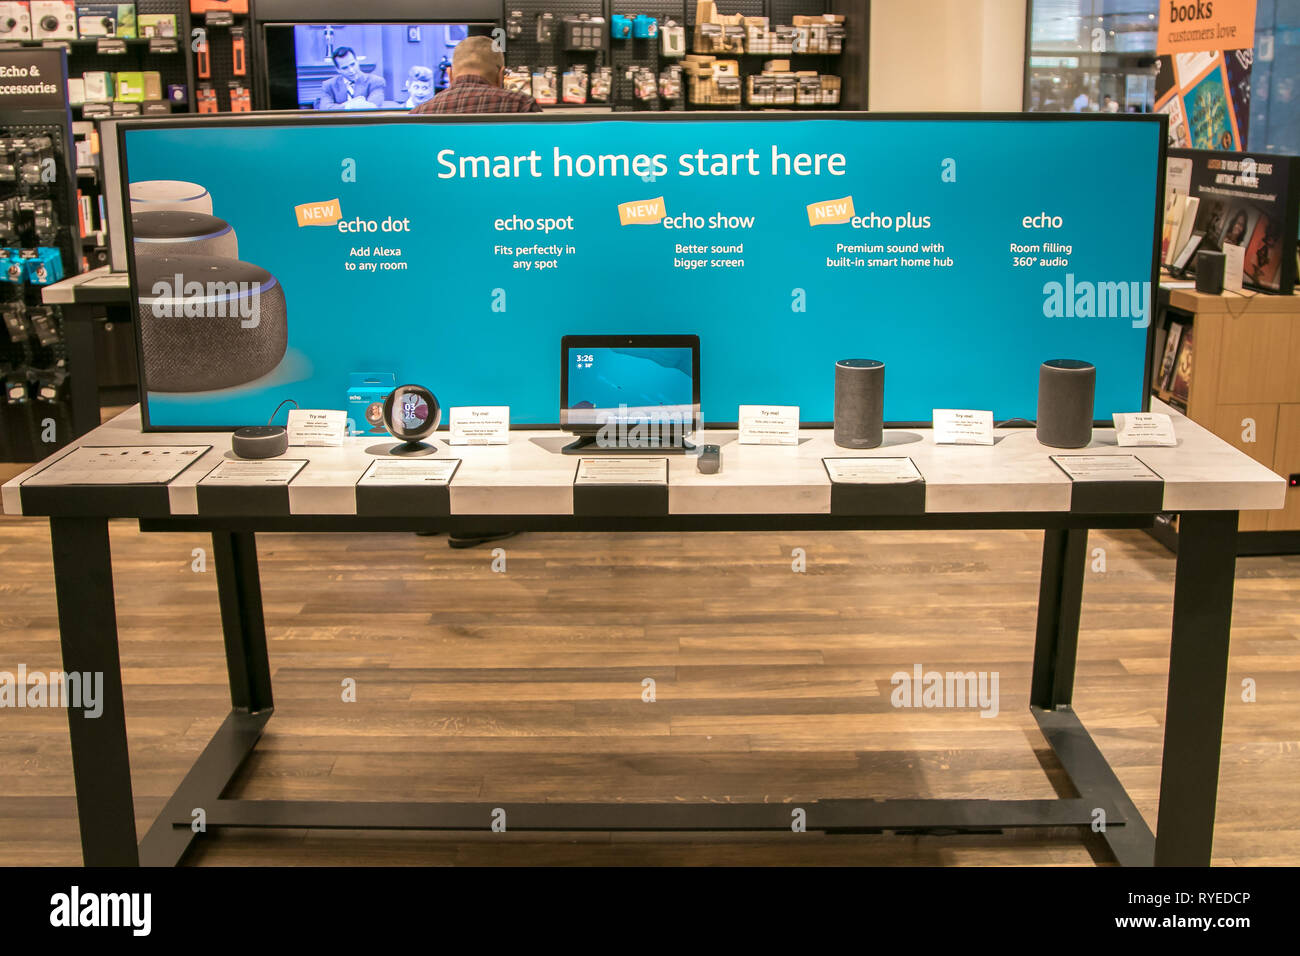 New York, 3/4/2019: Different Amazon Echo units are put on display at  Amazon Books store in Manhattan Stock Photo - Alamy